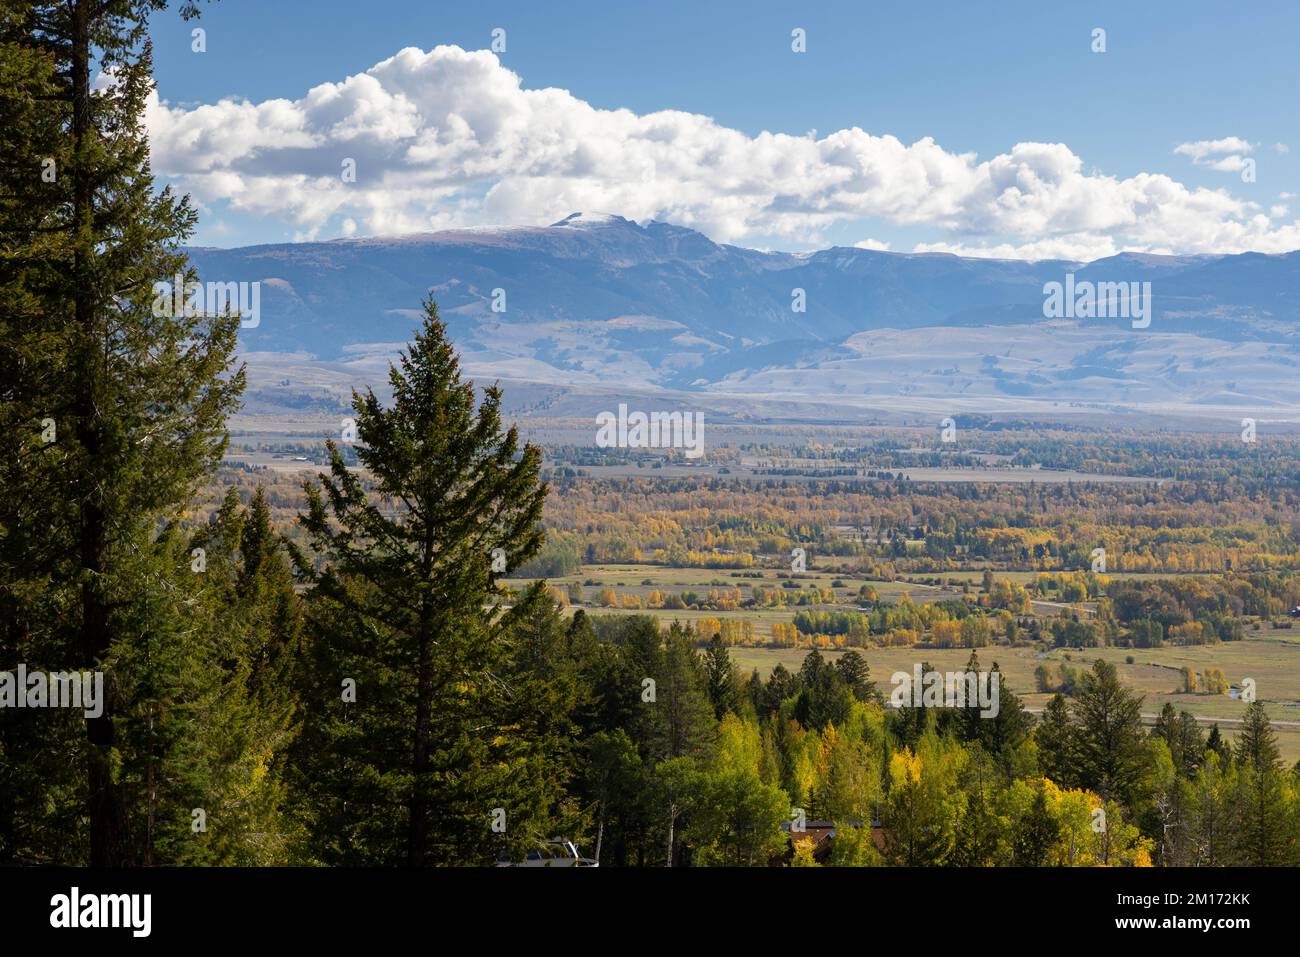 The Sleeping Indian peak rising in the distance above the valley of Jackson Hole as fall colors decorate the landscape. Bridger-Teton National Forest, Stock Photo